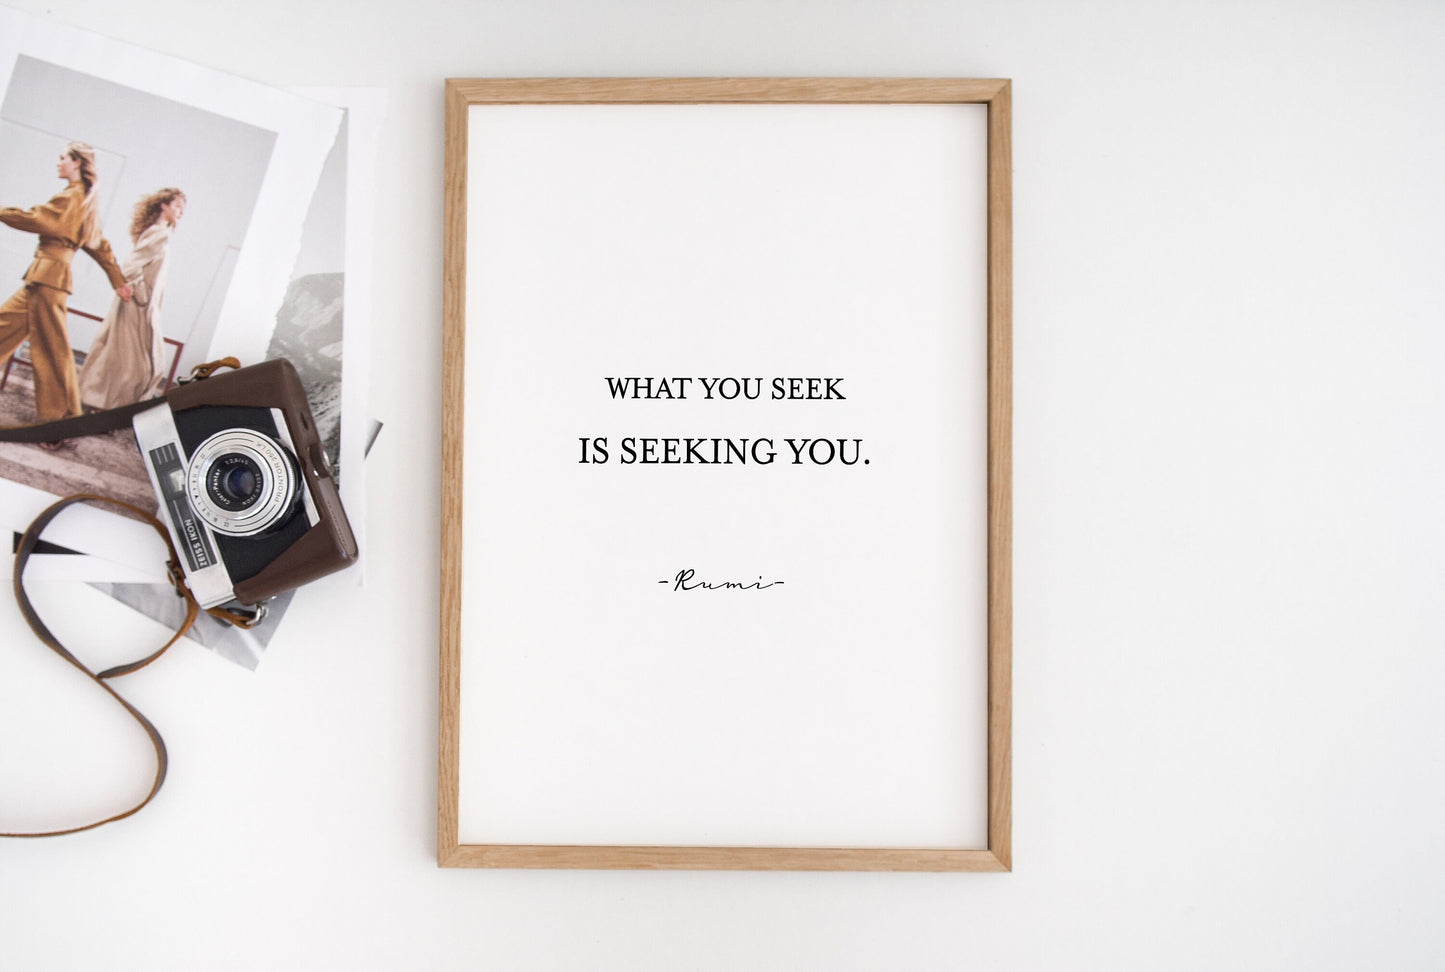 What you seek is seeking you,Rumi quote,Inspirational quote,Inspirational print,Wall decor,Positive affirmations,Motivational saying